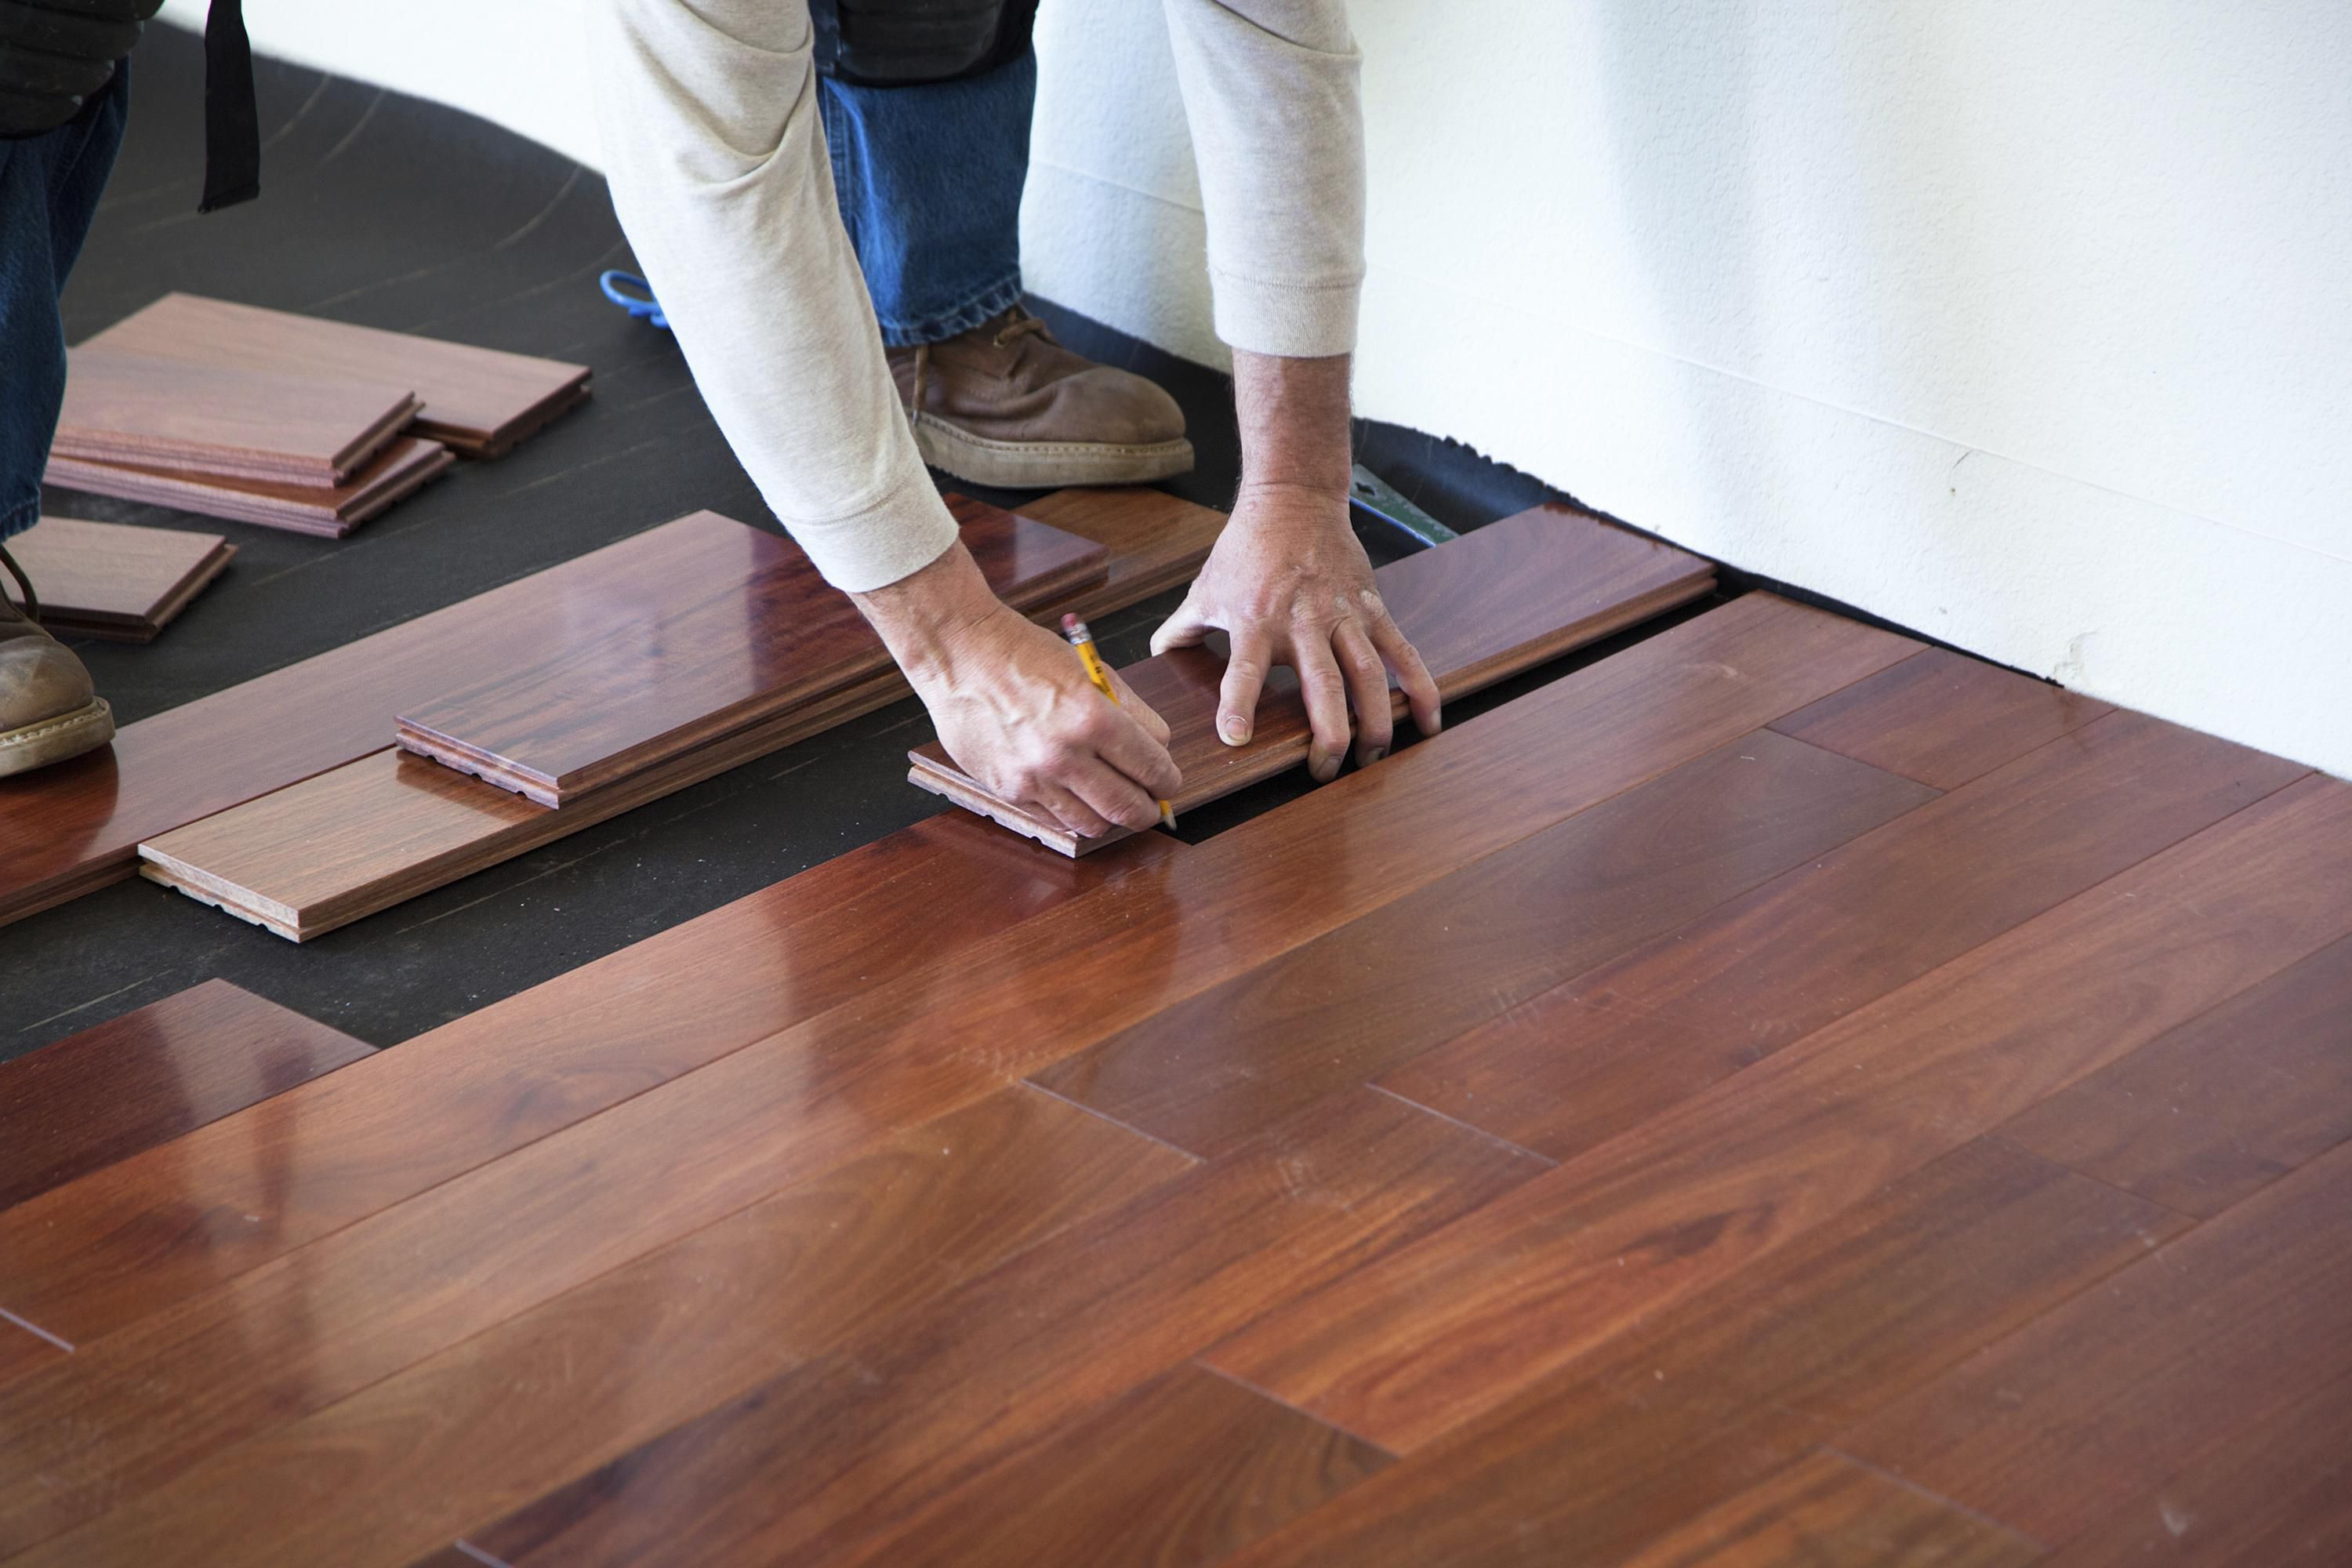 hardwood floor refinishing cost square foot of this is how much hardwood flooring to order for 170040982 56a49f213df78cf772834e21